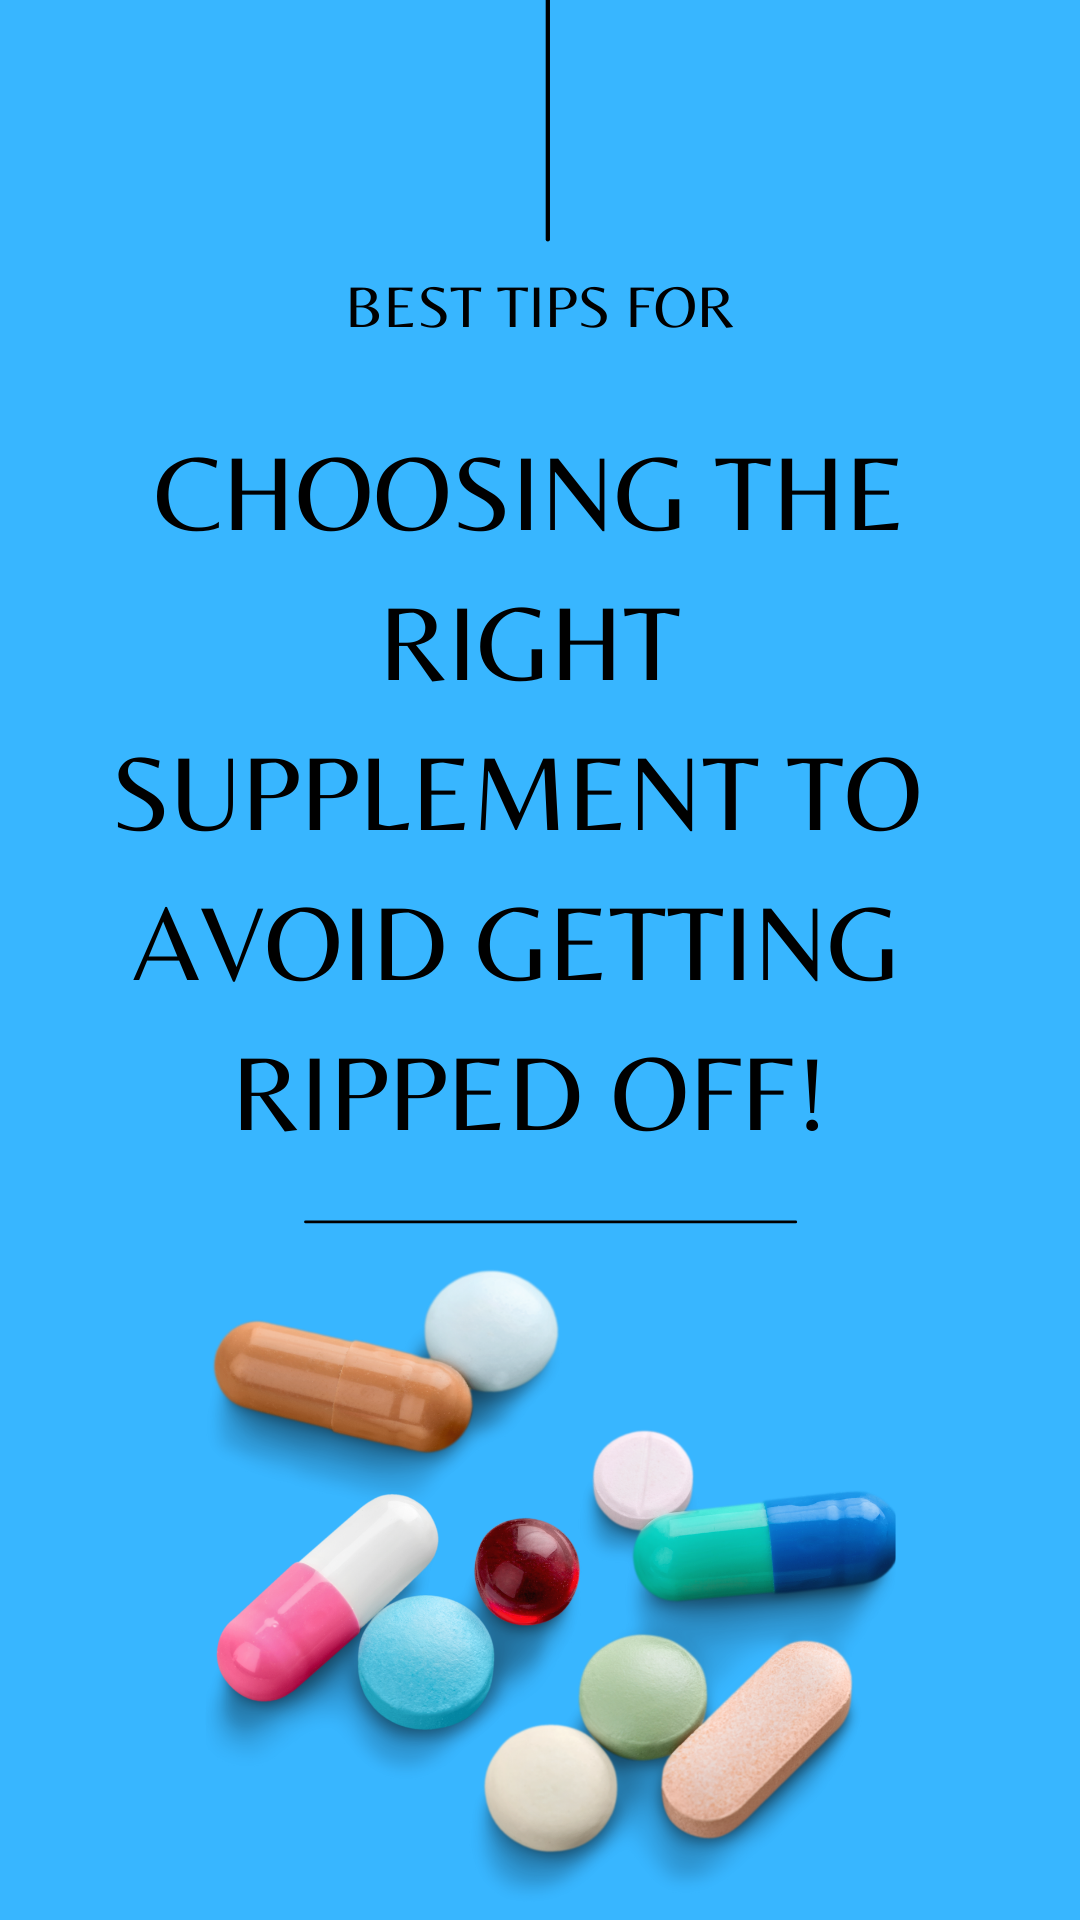 How to Choose The Right Supplements and Avoid Getting Ripped Off